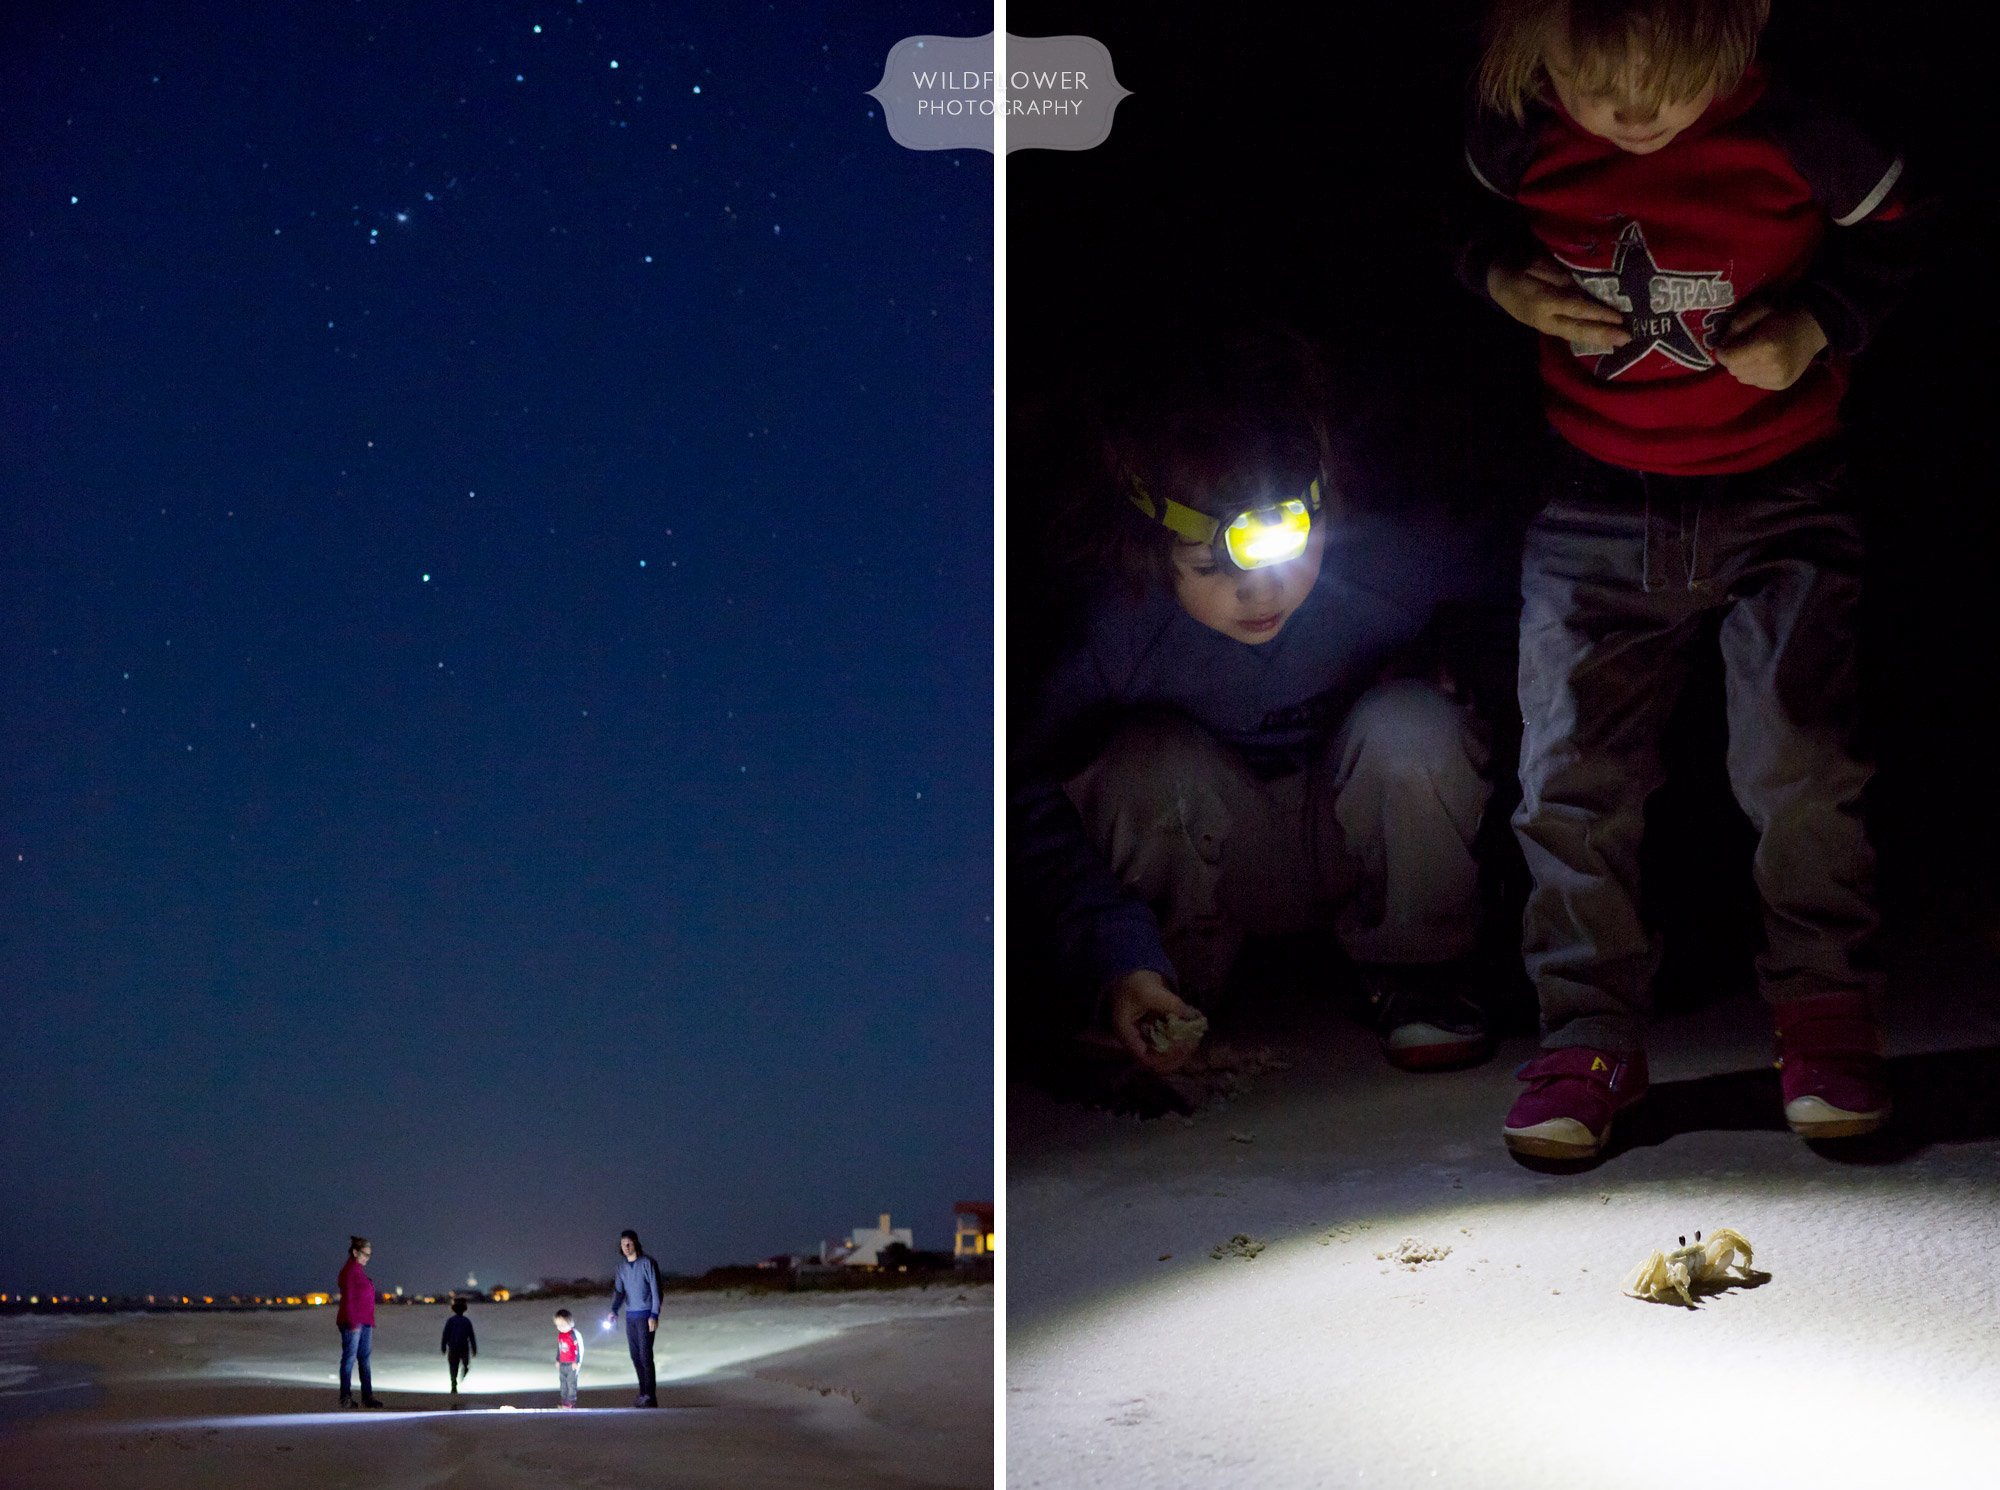 Kids looking for ghost crabs with flashlights at night on St. George Island, FL.